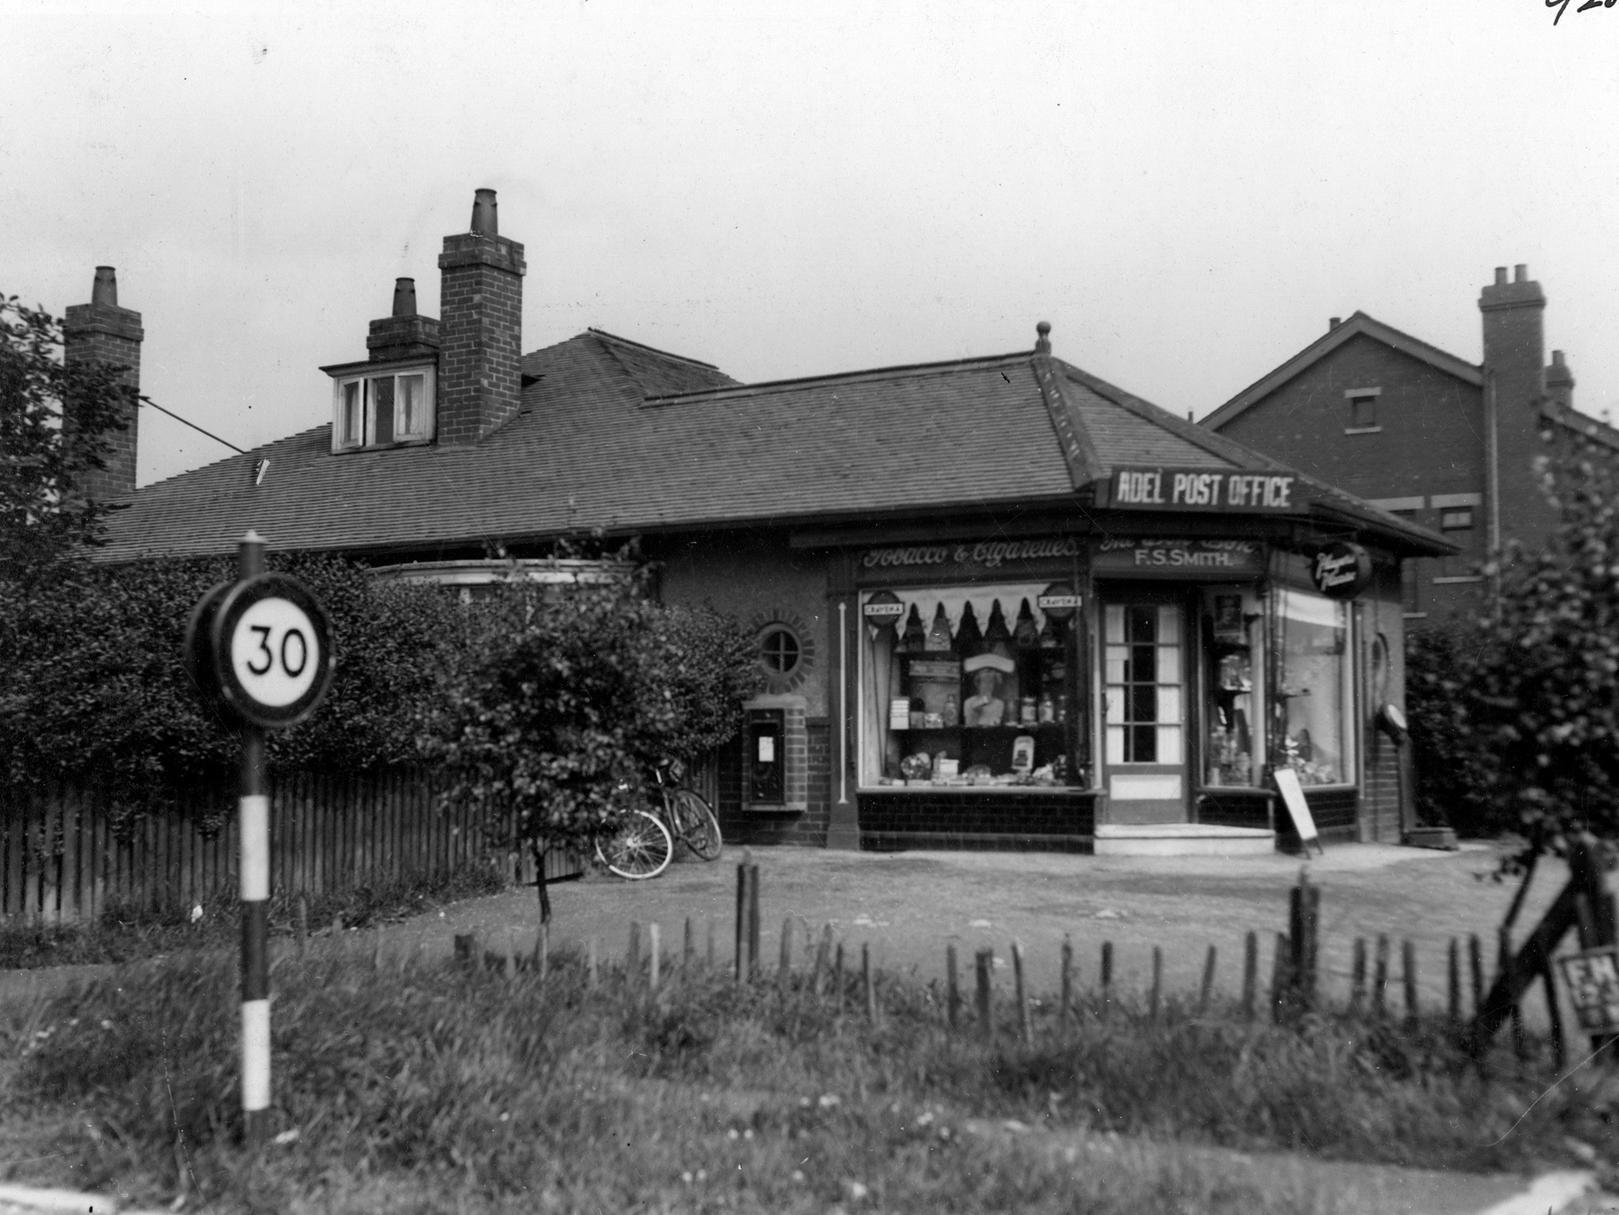 Adel Post Office on Otley Road. A post box is on the left wall. A road sign for 30 mile per hour speed limit is also to the left.